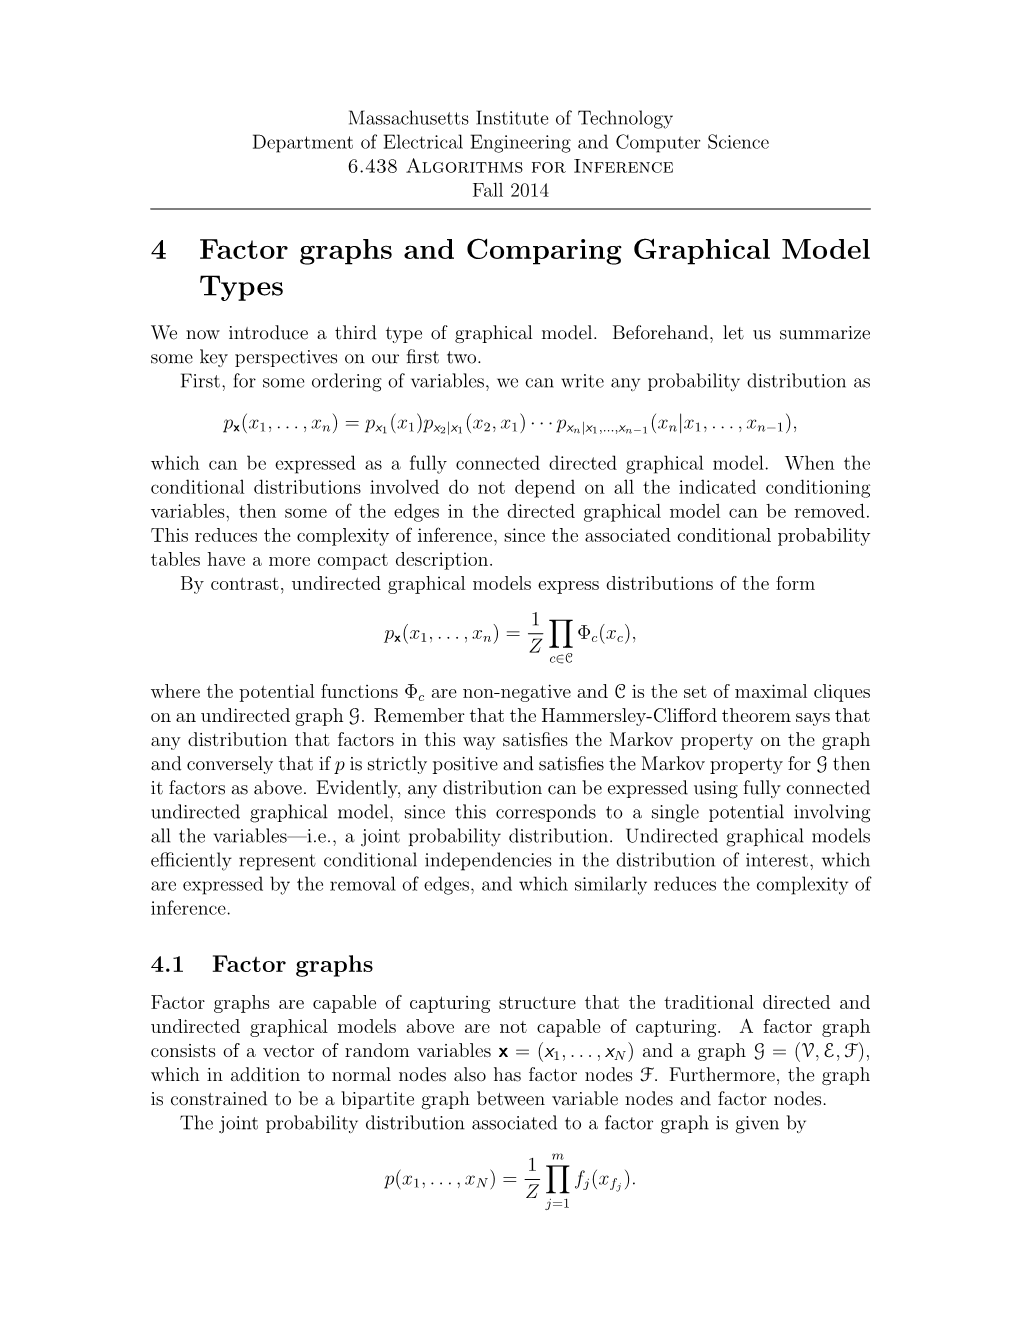 4 Factor Graphs and Comparing Graphical Model Types